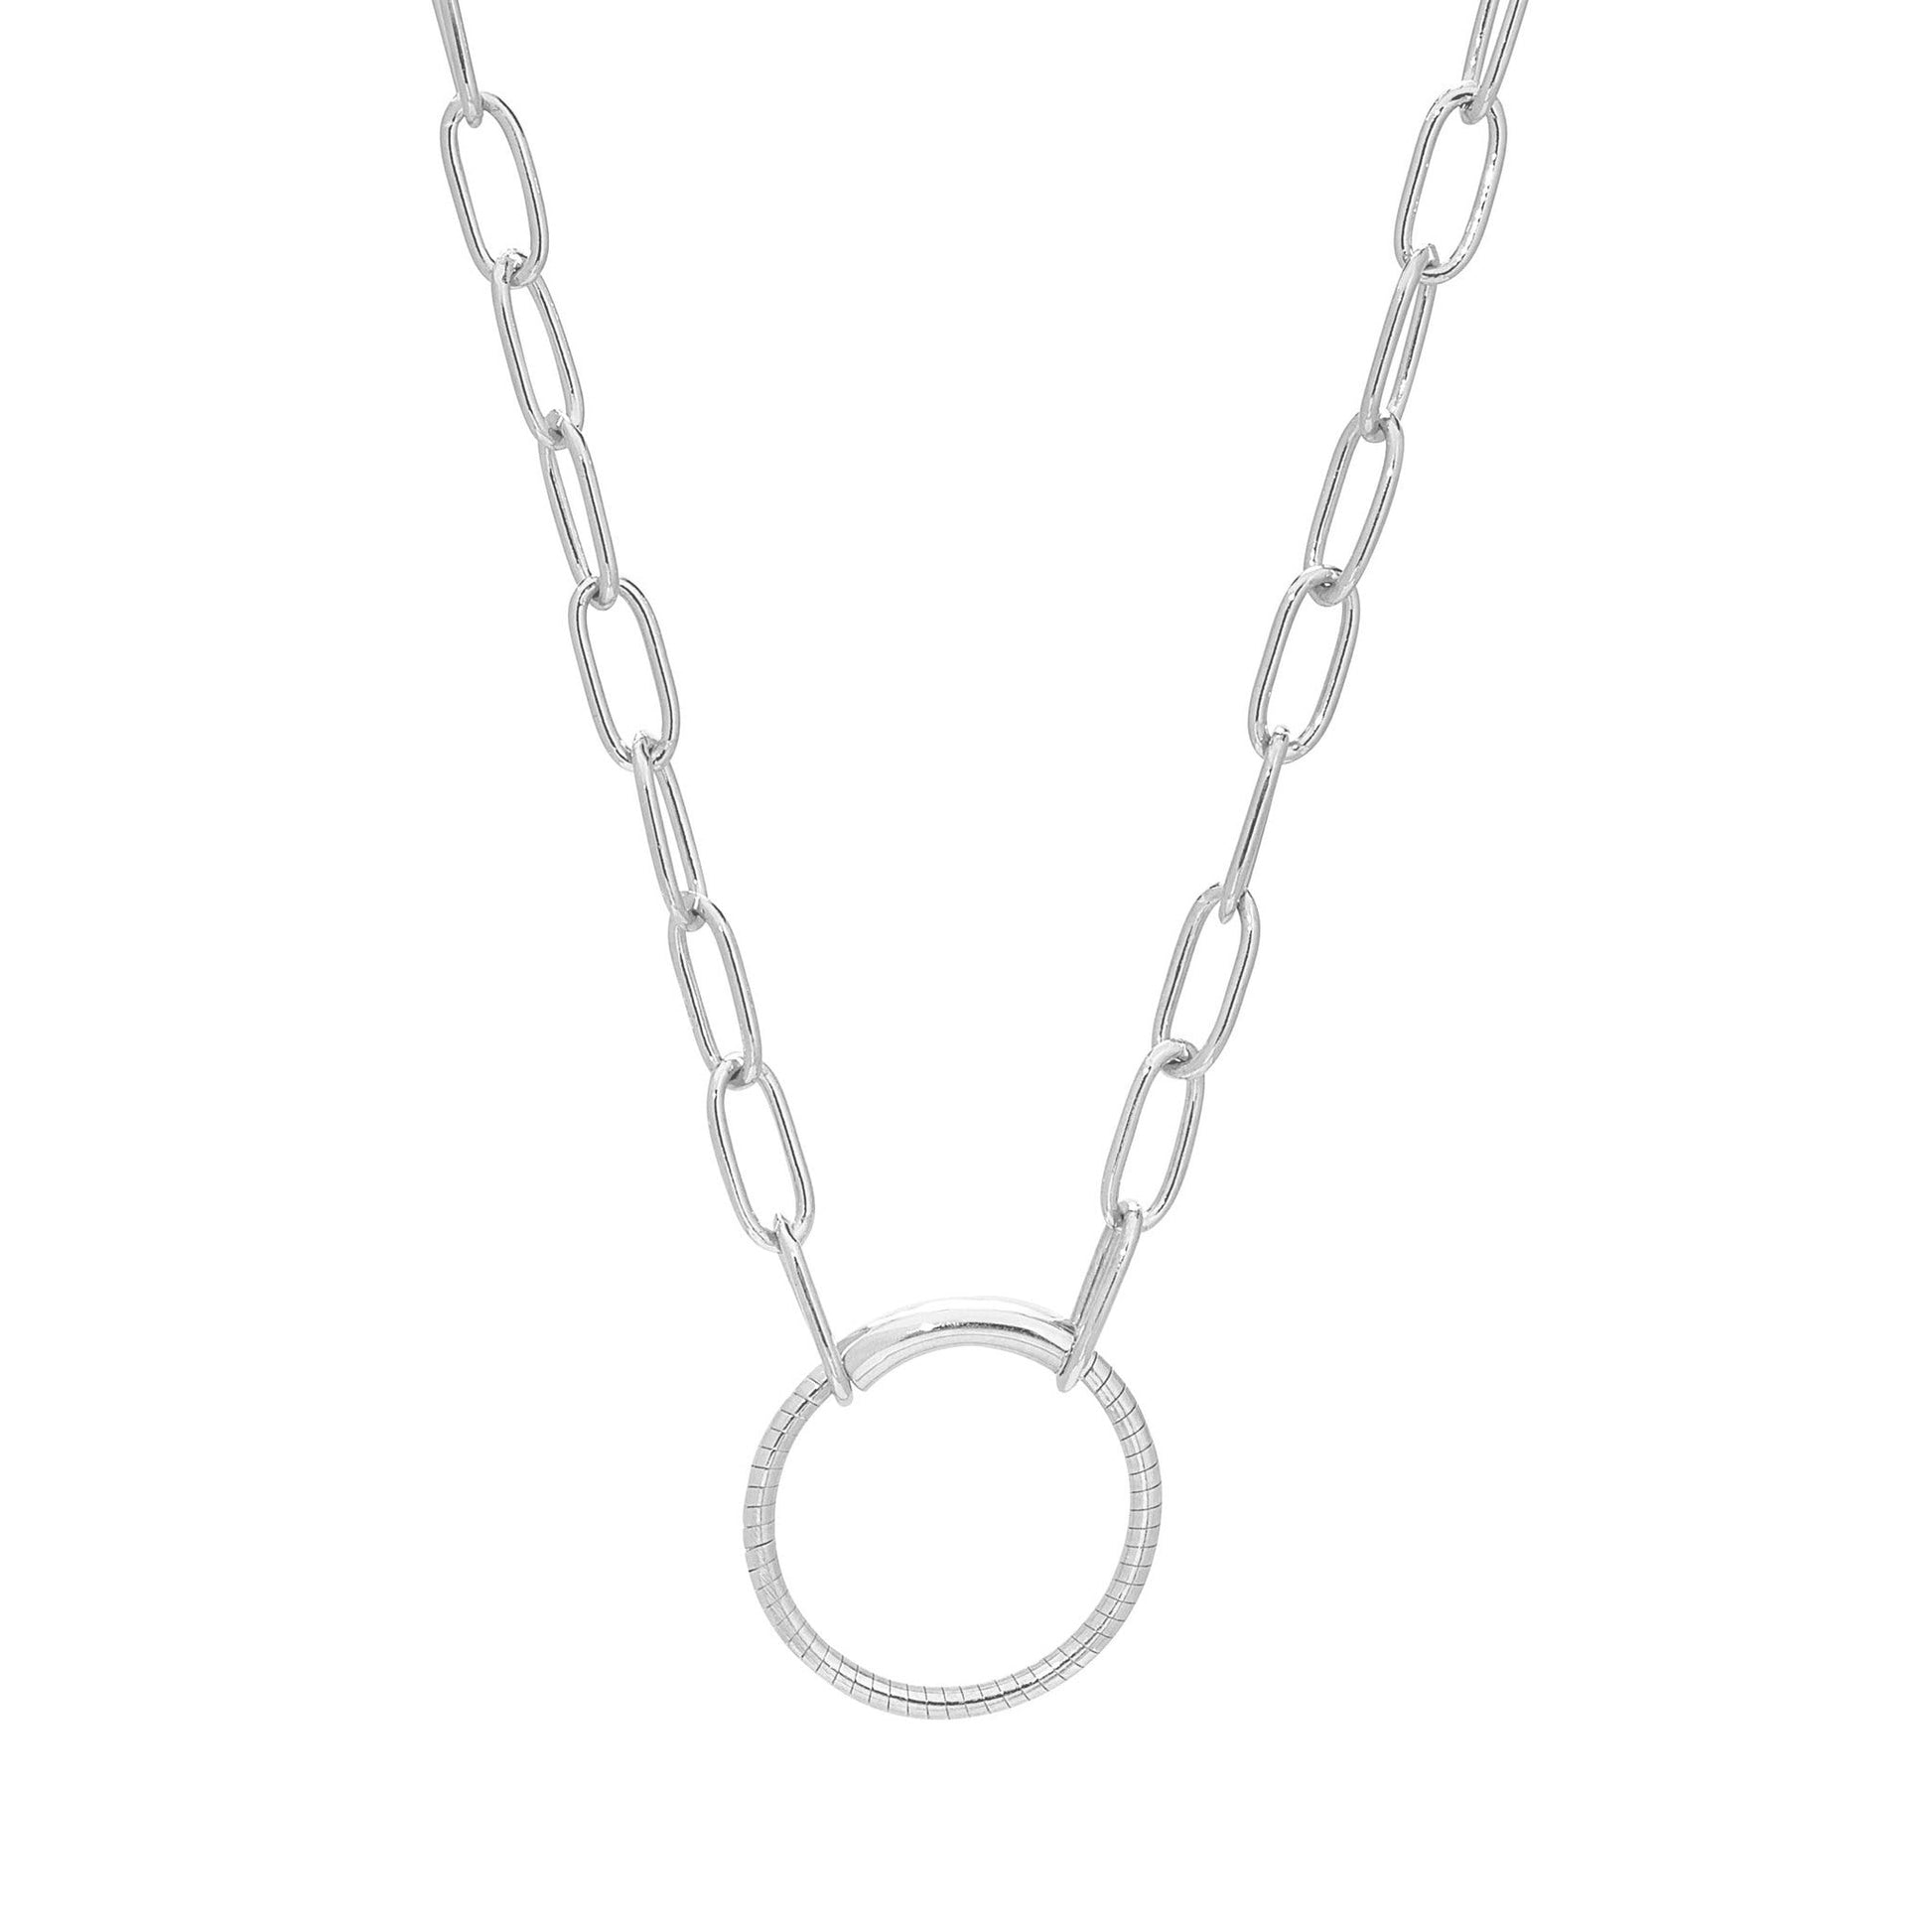 A paperclip necklace with flexible cable loop displayed on a neutral white background.